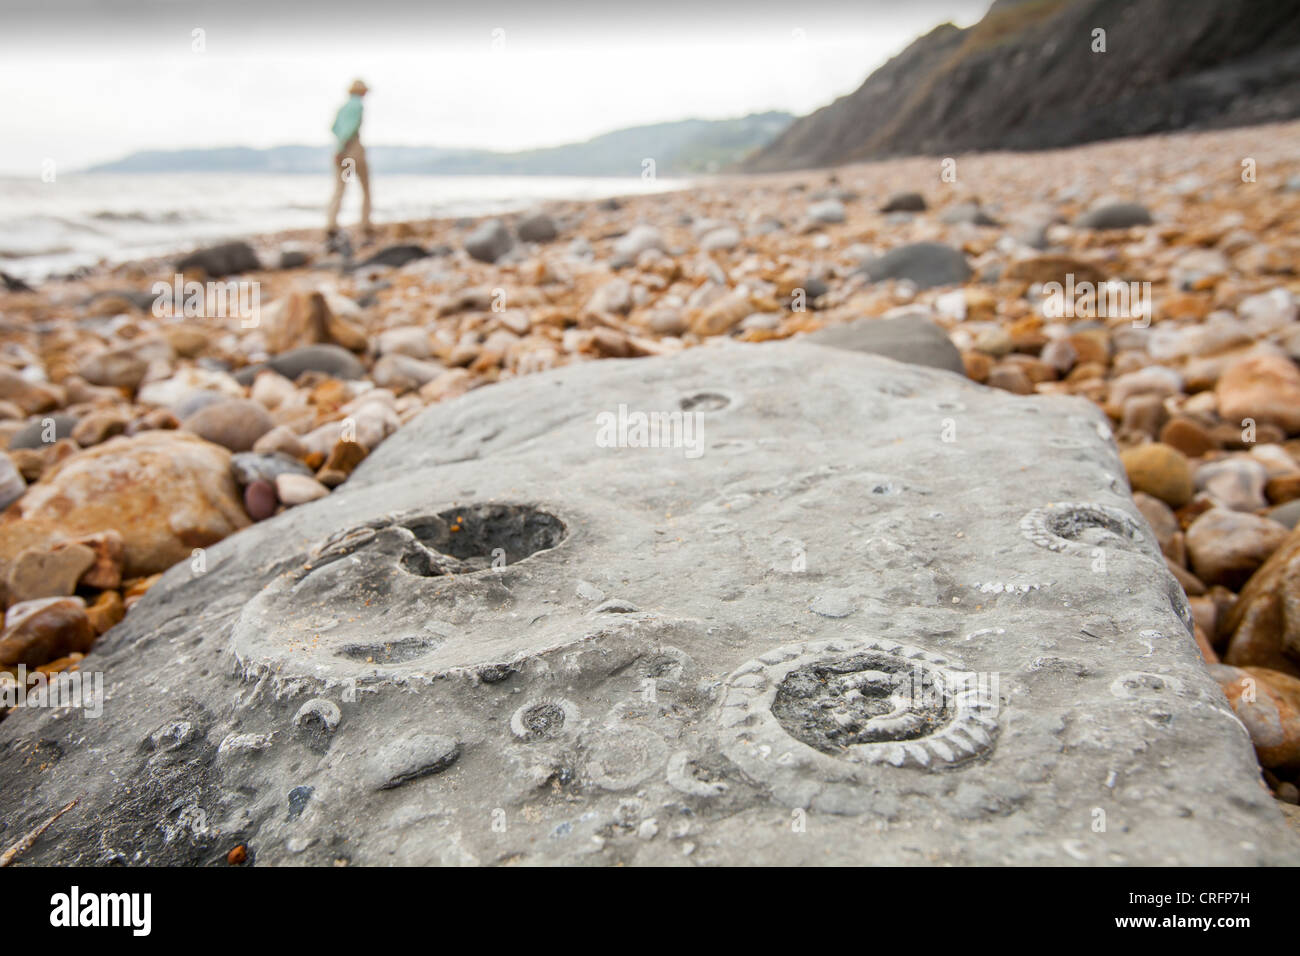 Ammonite fossils on the world famous Charmouth fossil beach, a UNESCO world heritage site as part of the Jurassic coast, Dorset, UK. Stock Photo